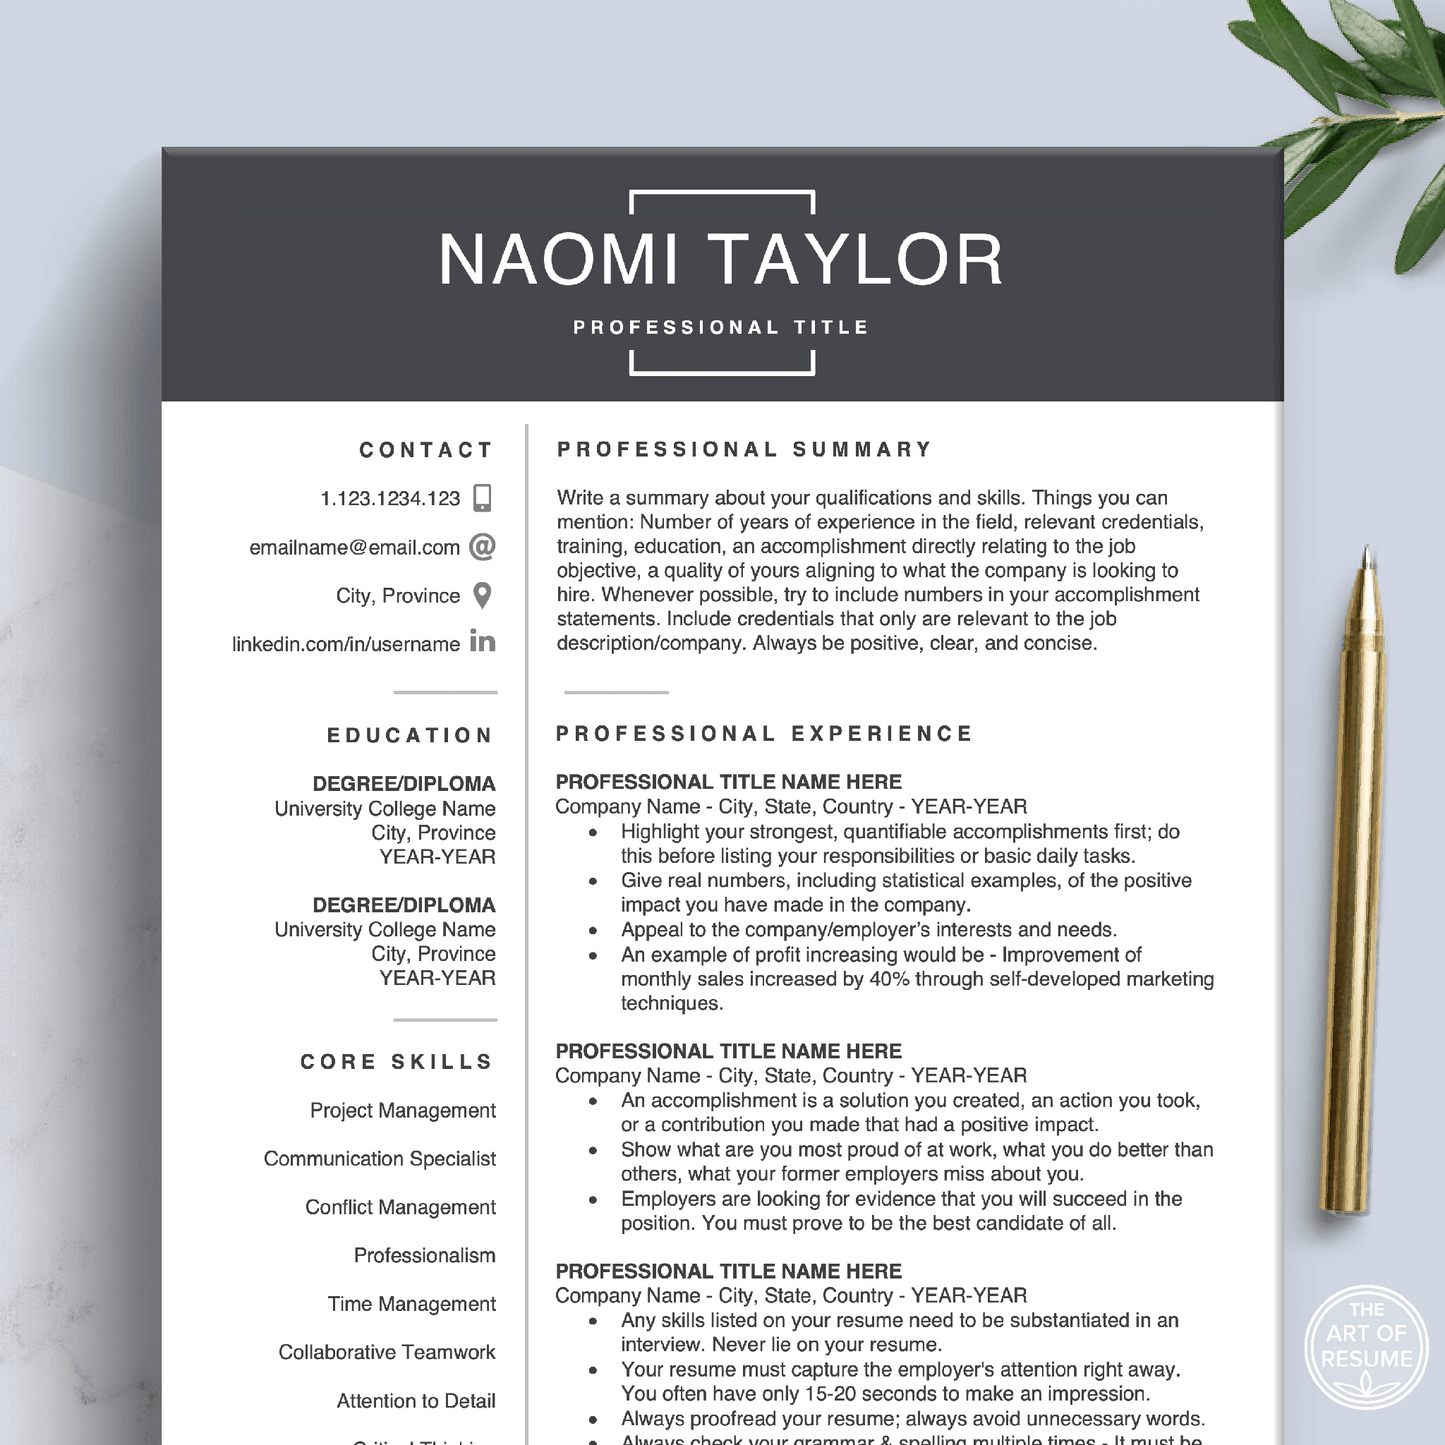 Professional Resume Template | Free Resume Writing Guide Included - The Art of Resume